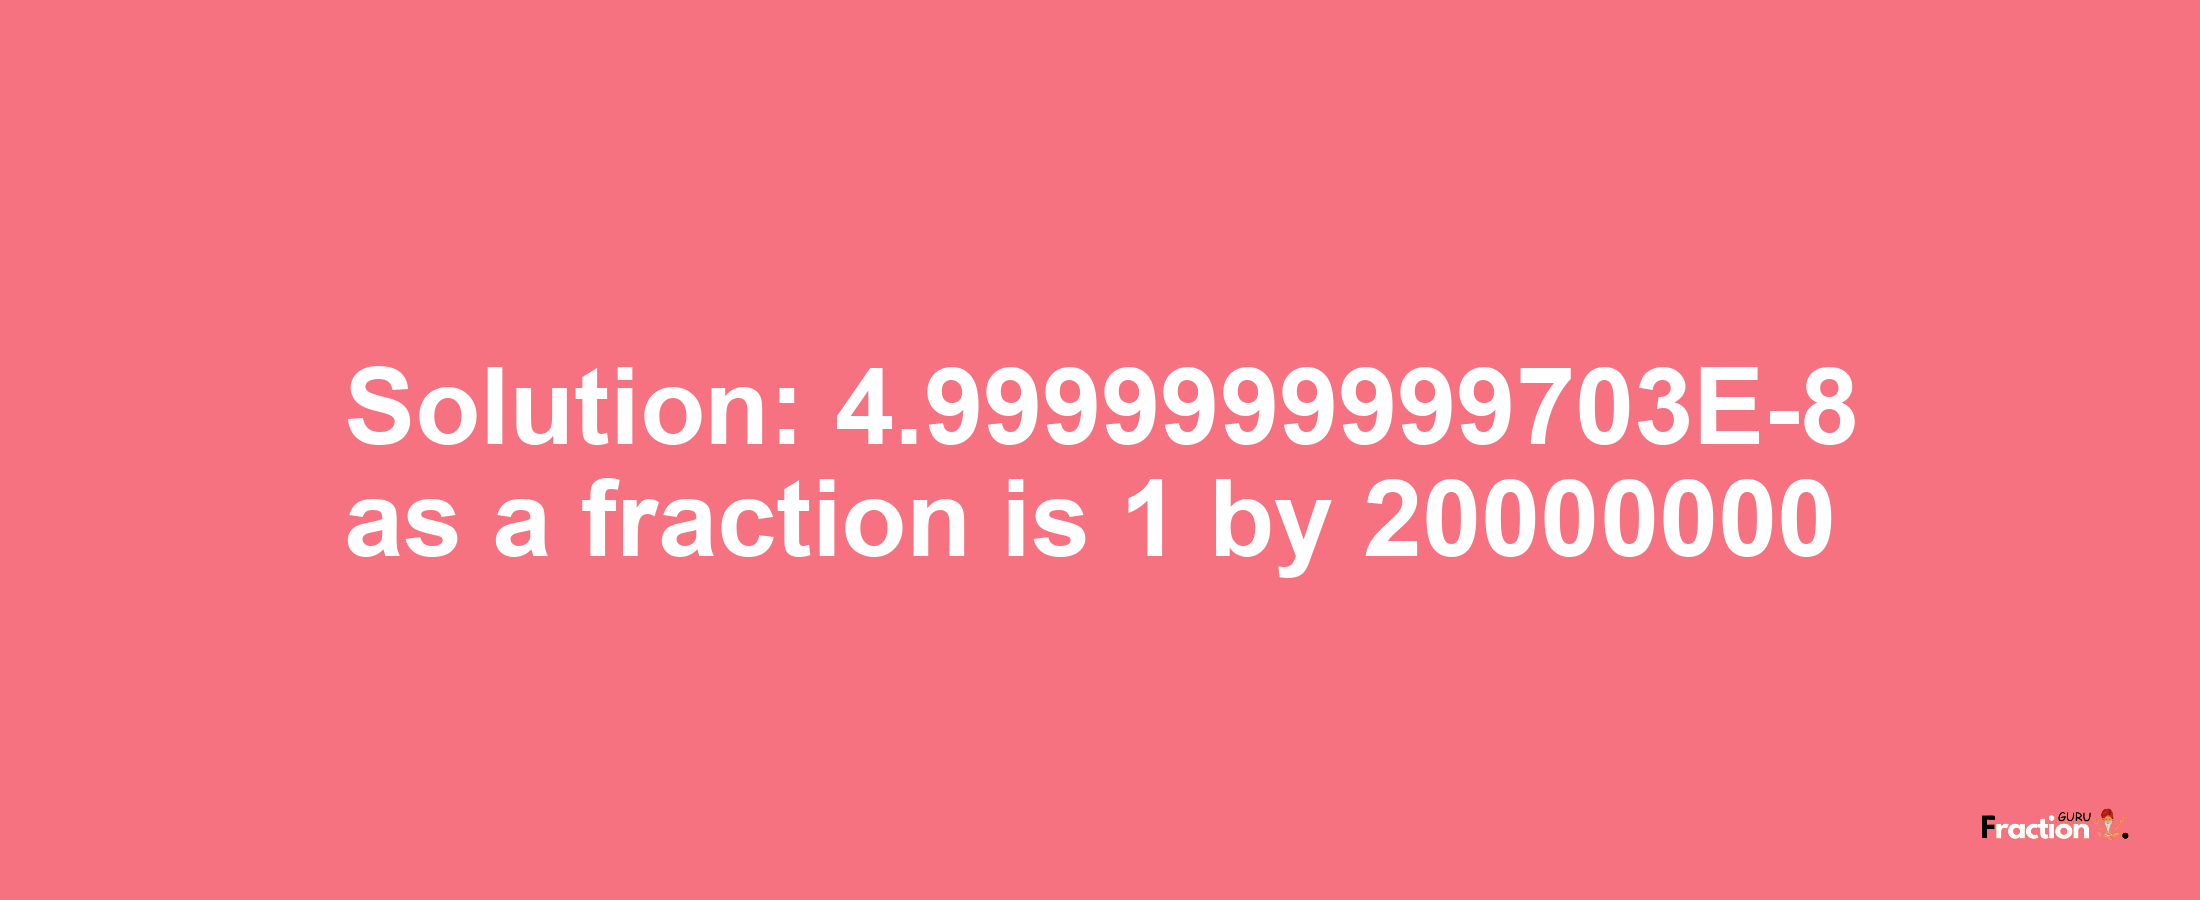 Solution:4.9999999999703E-8 as a fraction is 1/20000000